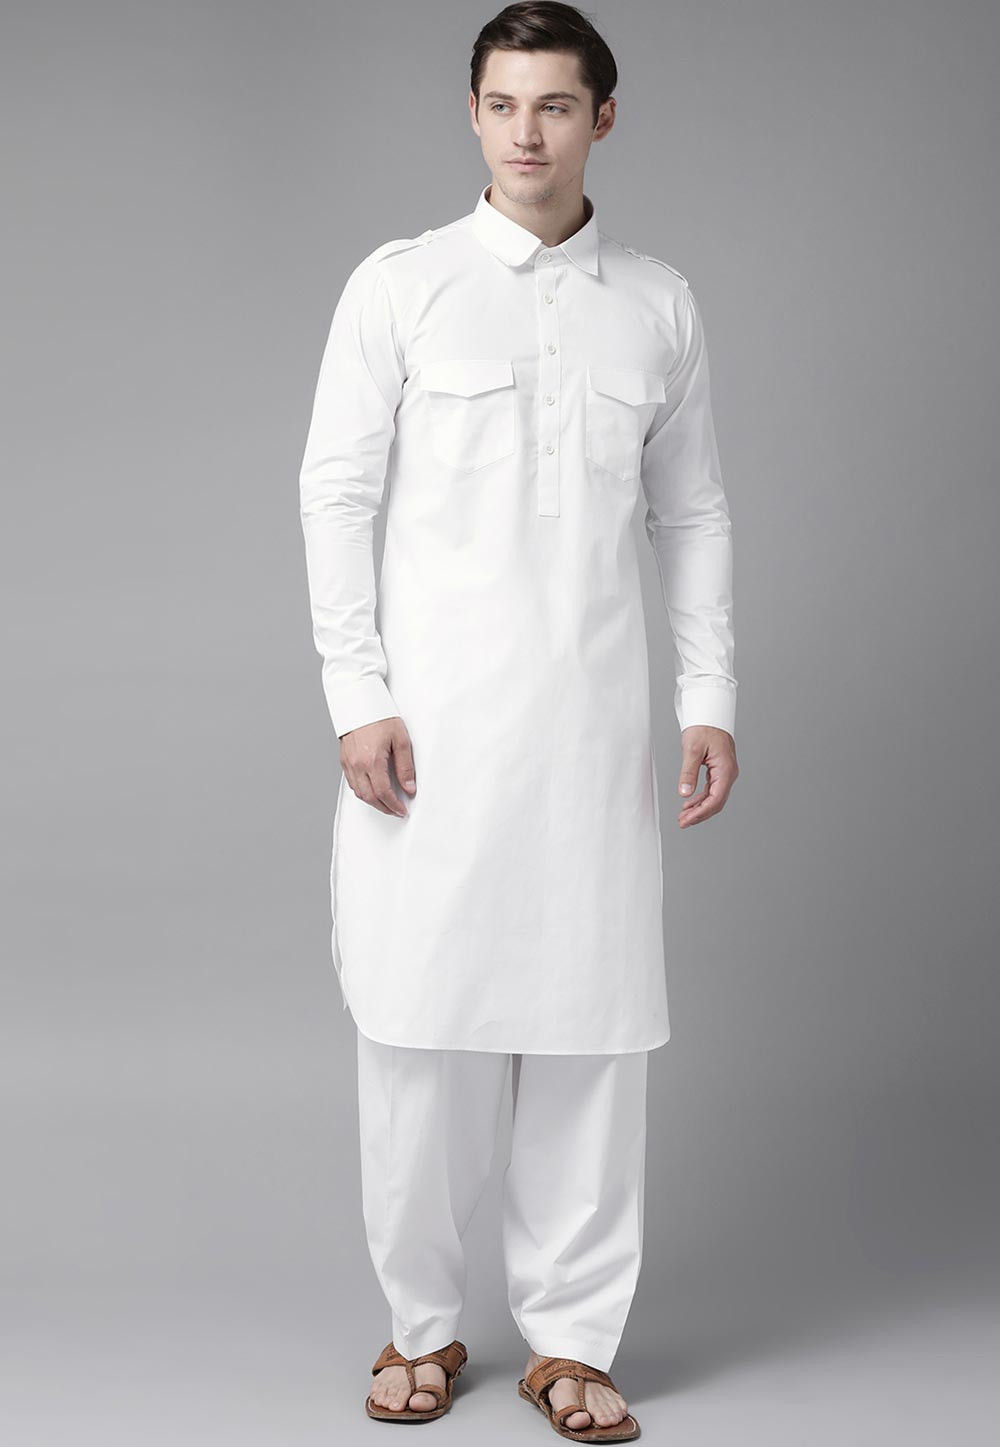 Men's Pathani Suit – The Imperial India Company